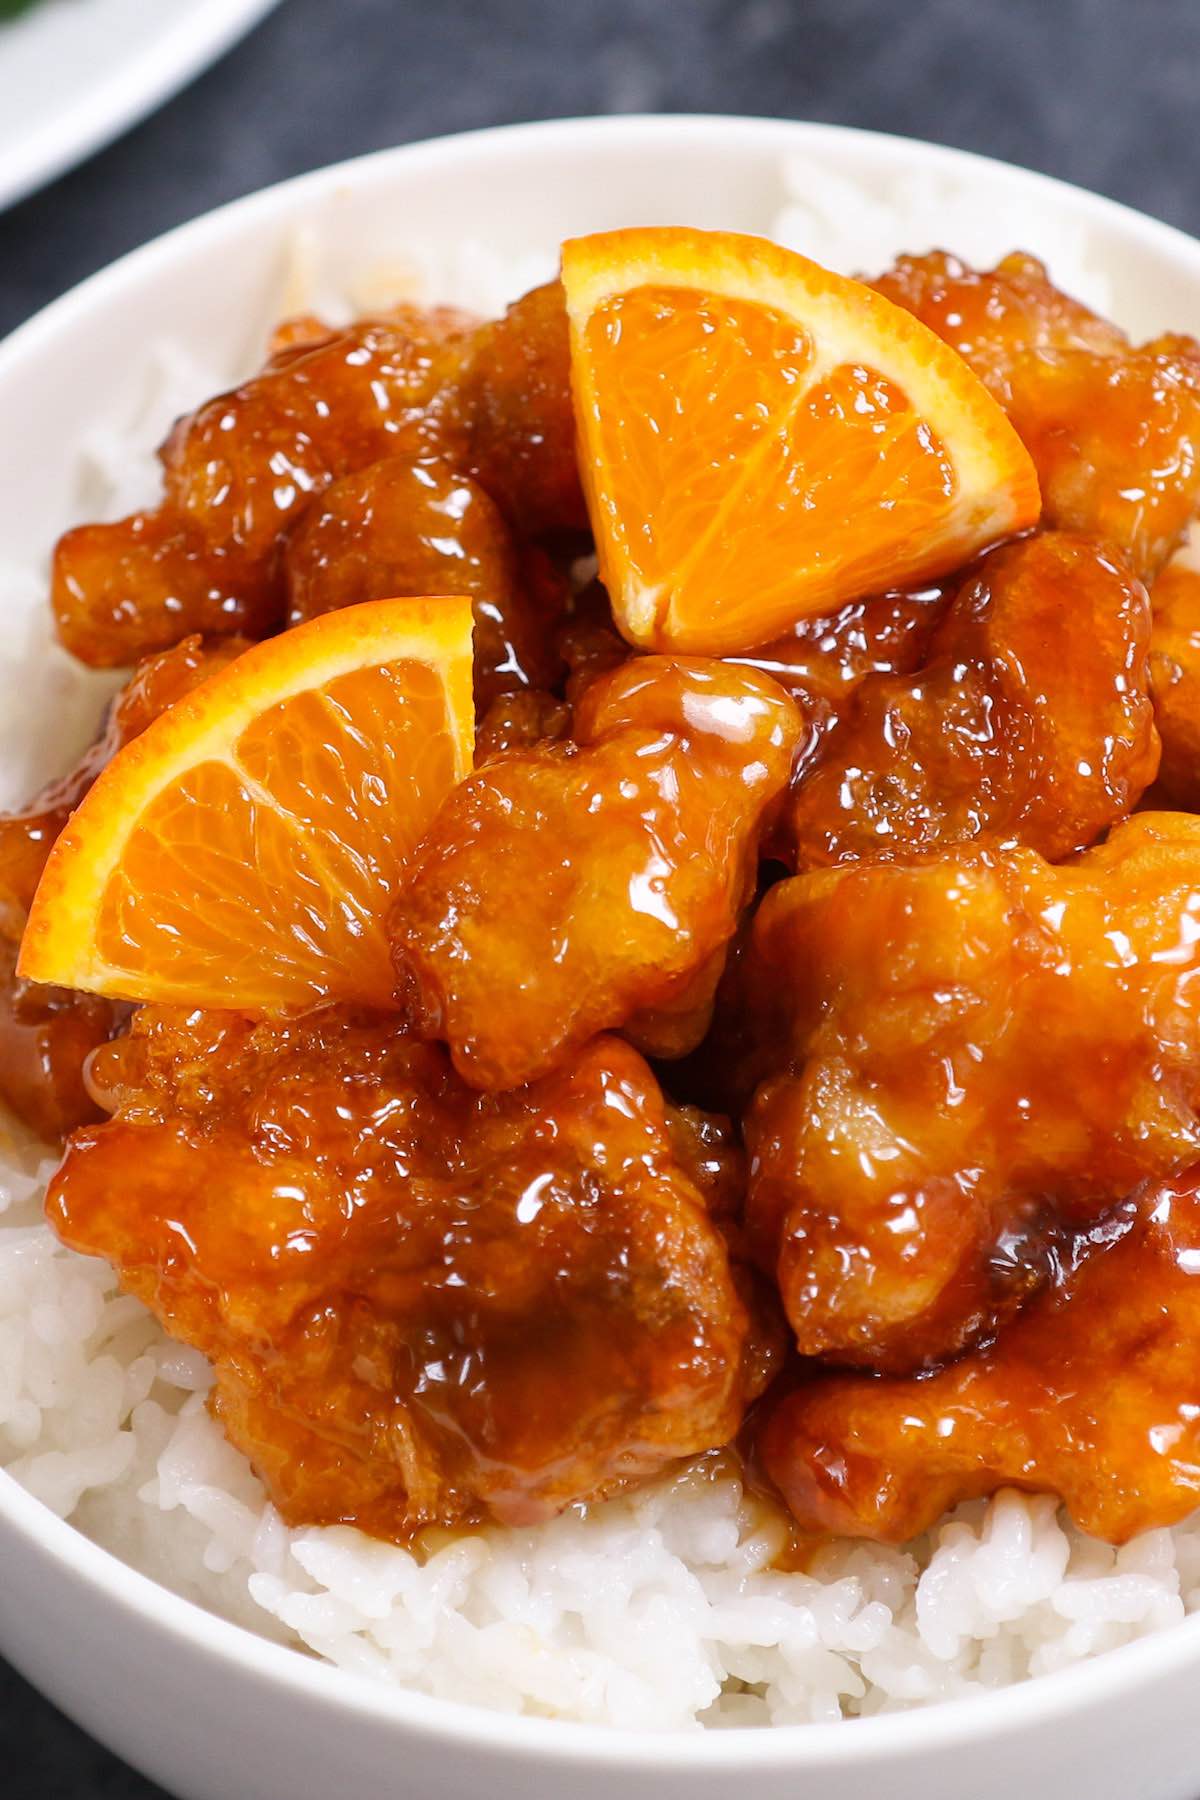 Sticky Orange Chicken garnished with fresh orange wedges and served on a bed of steamed rice